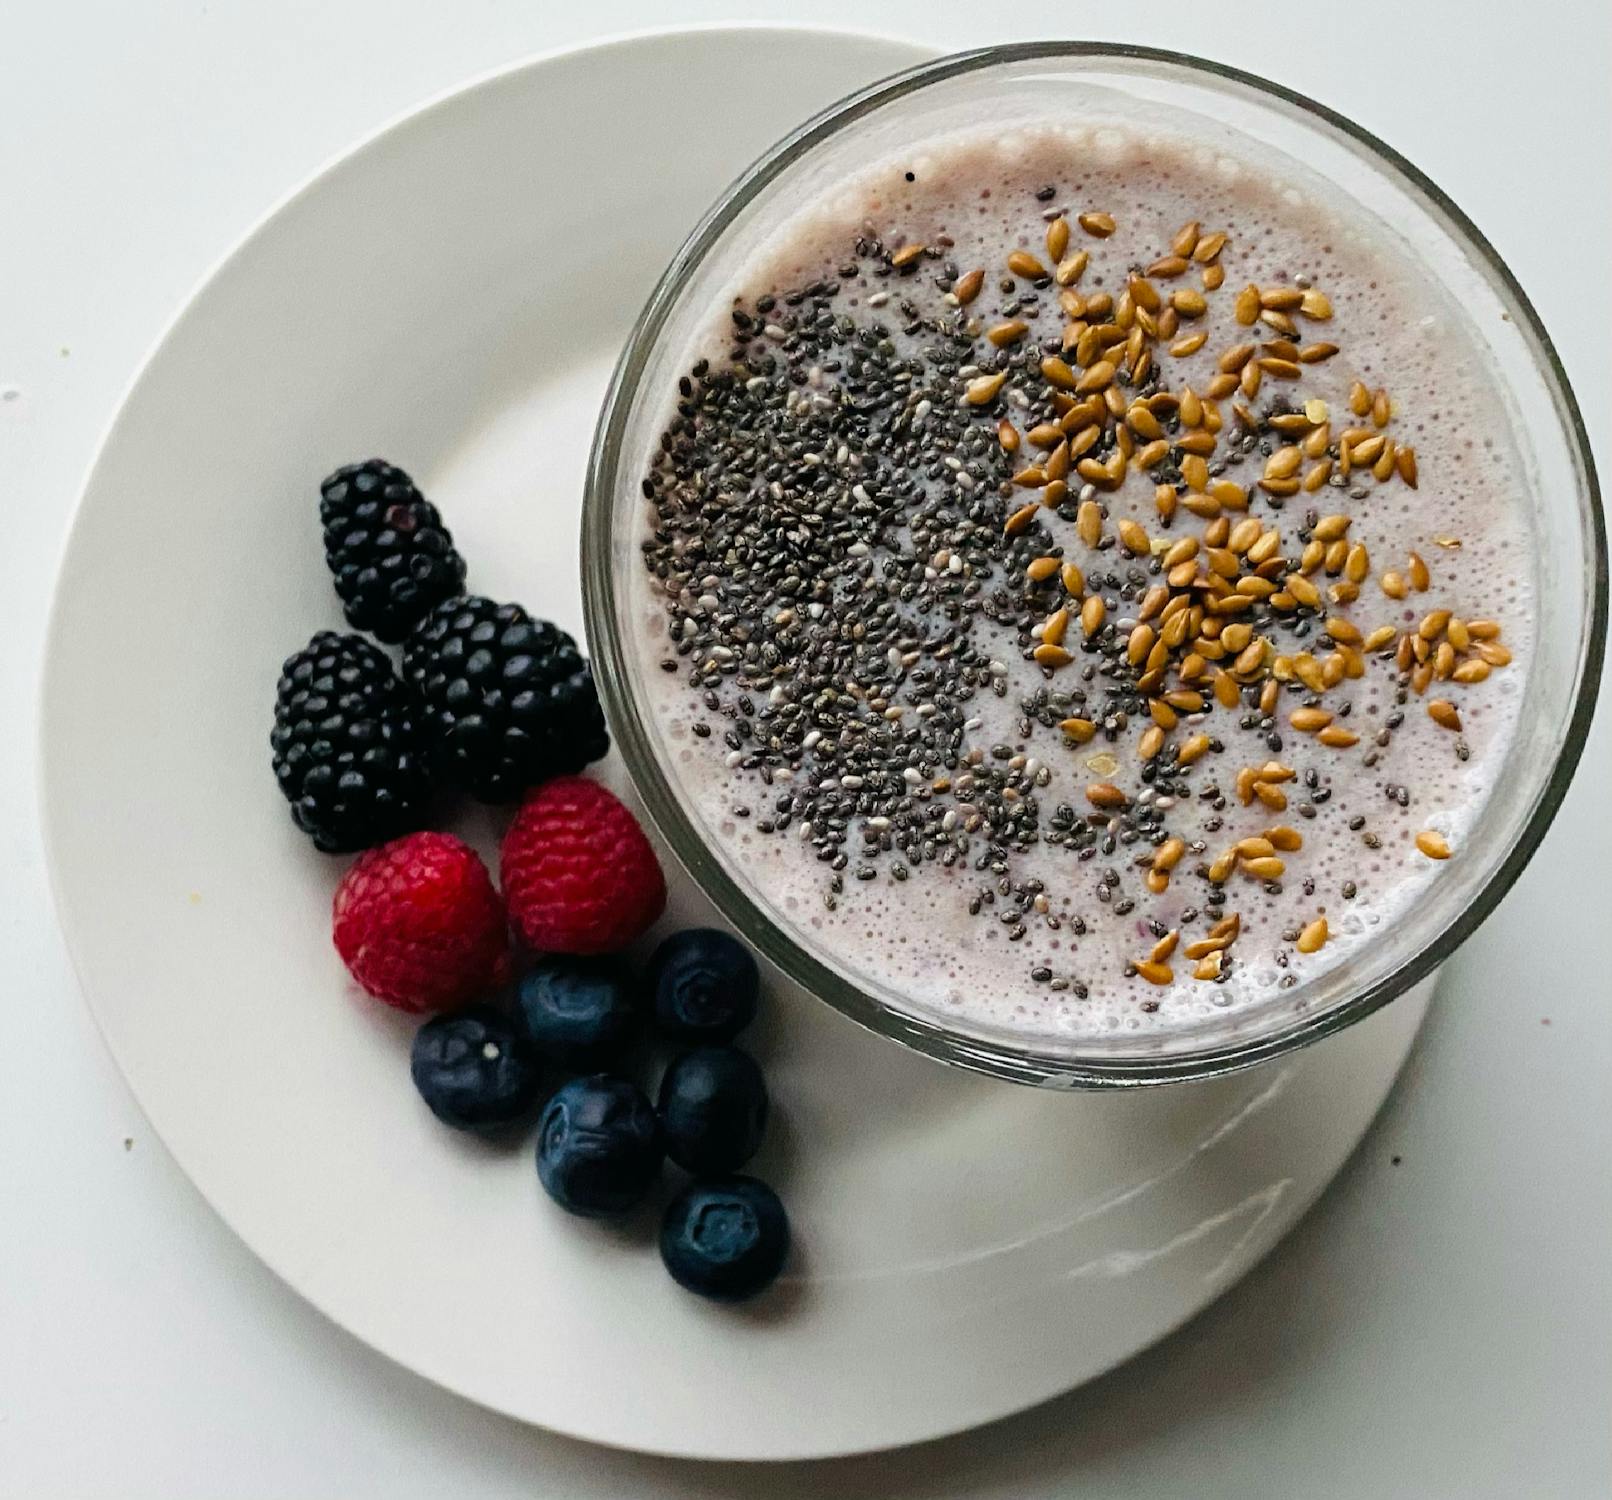 Flaxseed  Photo by ZN’s Food&NatureArt from Pexels: https://www.pexels.com/photo/a-close-up-shot-of-a-smoothie-bowl-9026809/